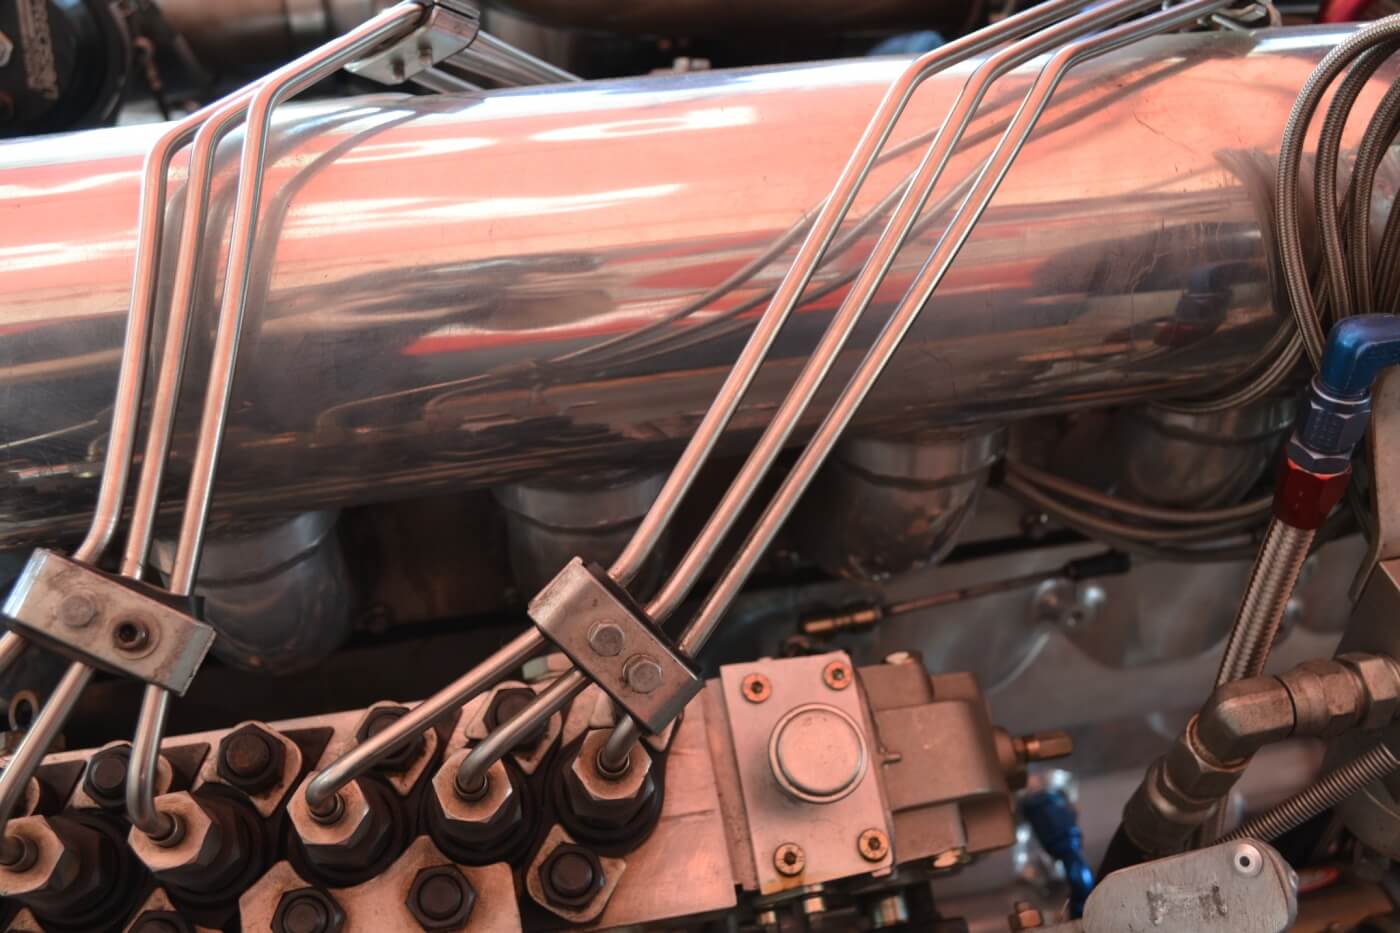 With an engine program like John's, airflow modifications are incorporated into virtually every part of the engine. A side-draft individual runner intake from ZZ Fabrications is a big step up from the stock shelf intake and ensures that plenty of air gets fed to the Hamilton Cams cylinder head.